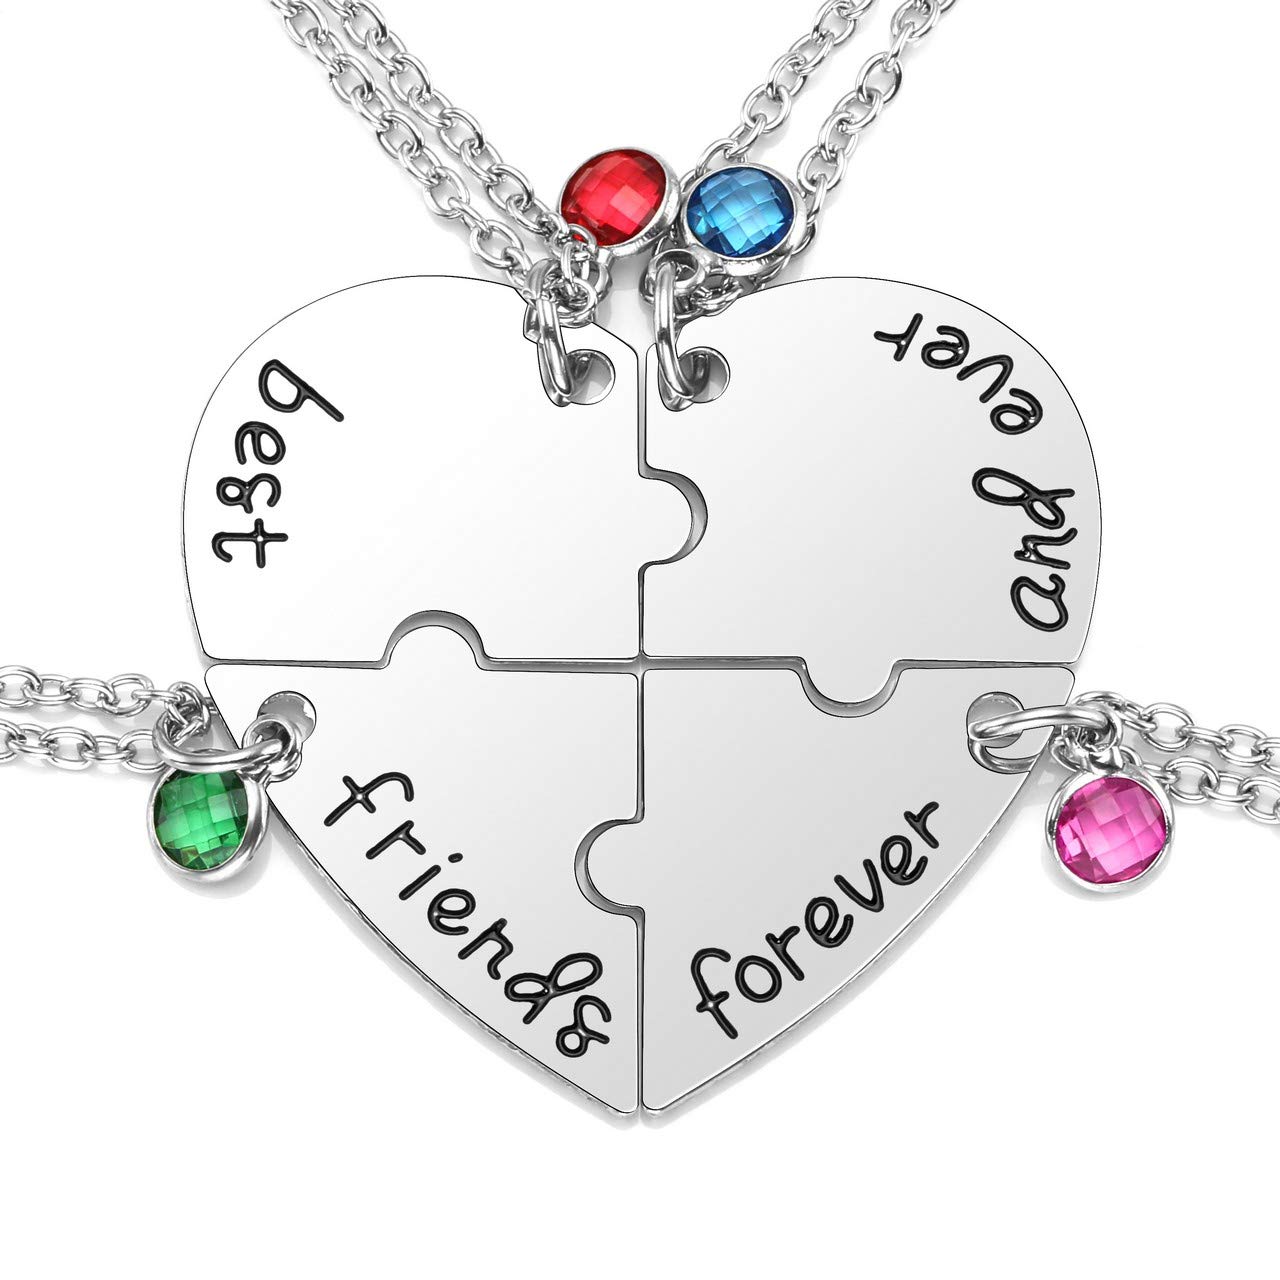 Heart Puzzle Necklace / Keychain – Customize You Shop